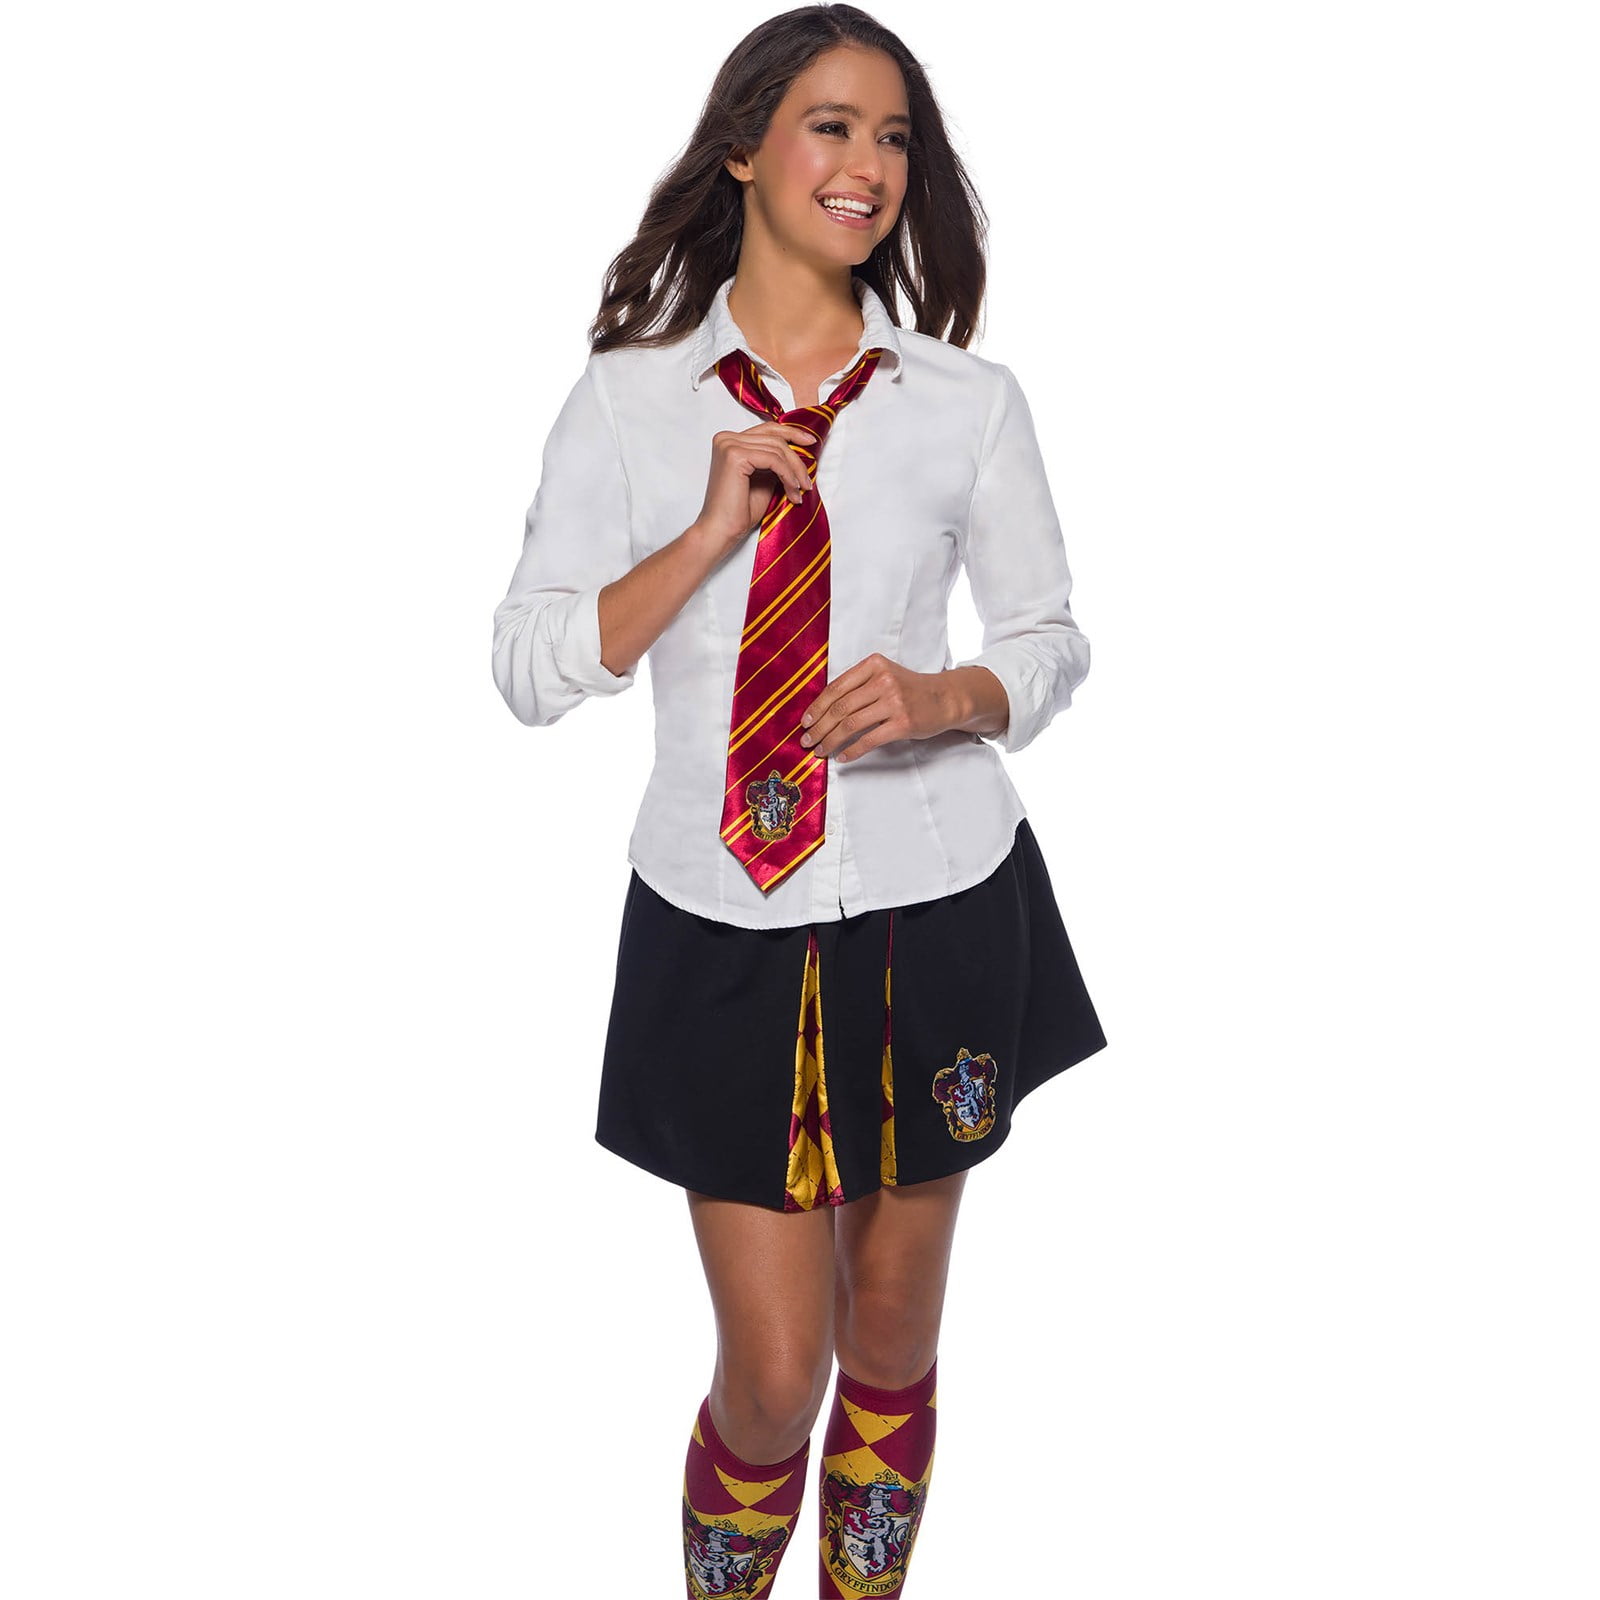 Wizard School Tie Harry Potter Fancy Dress Accessory Costume Outfit Gryffindor 